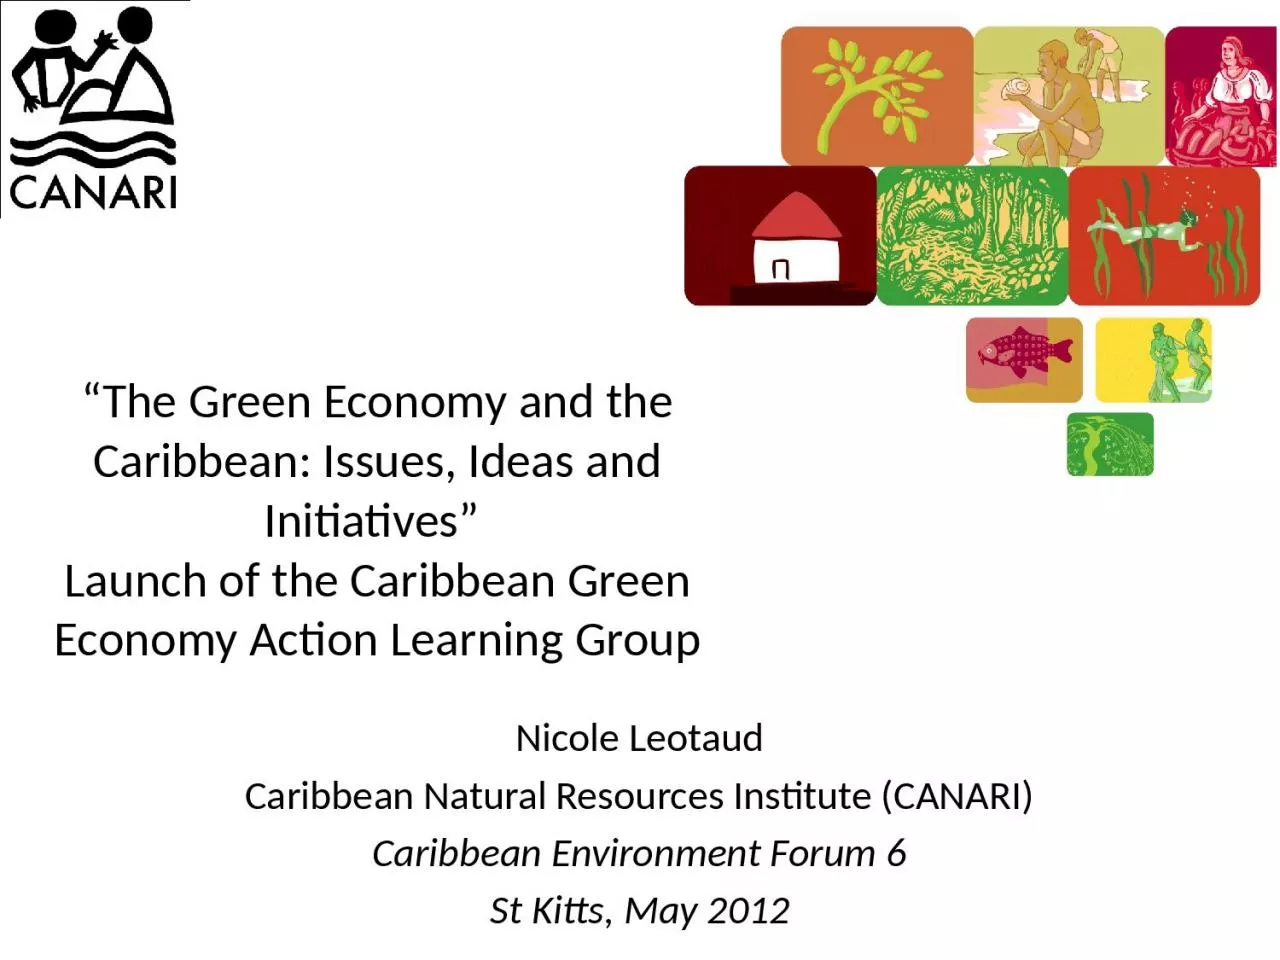 “The Green Economy and the Caribbean: Issues, Ideas and Initiatives”